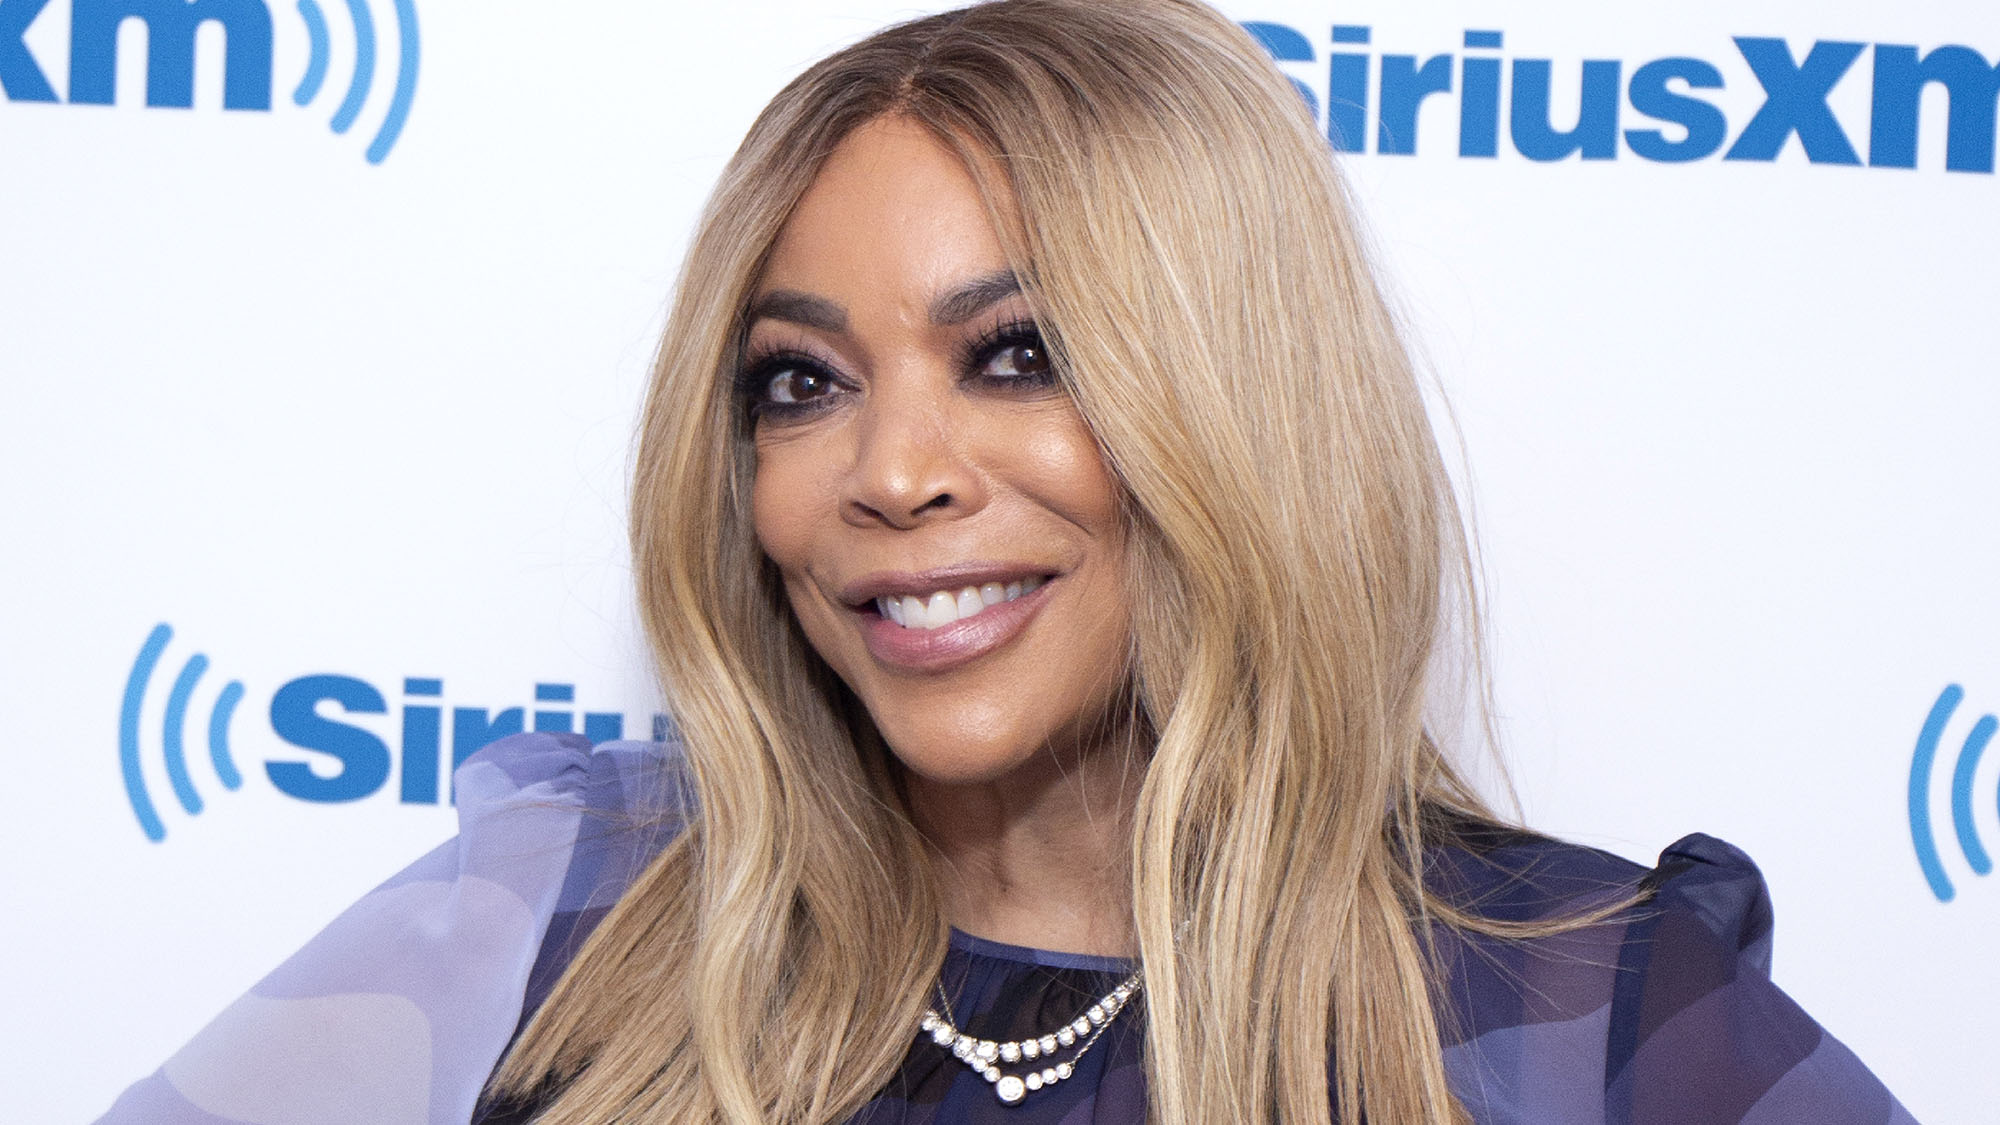 Wendy Williams Returns to TV and Gives Fans an Update on Her Health